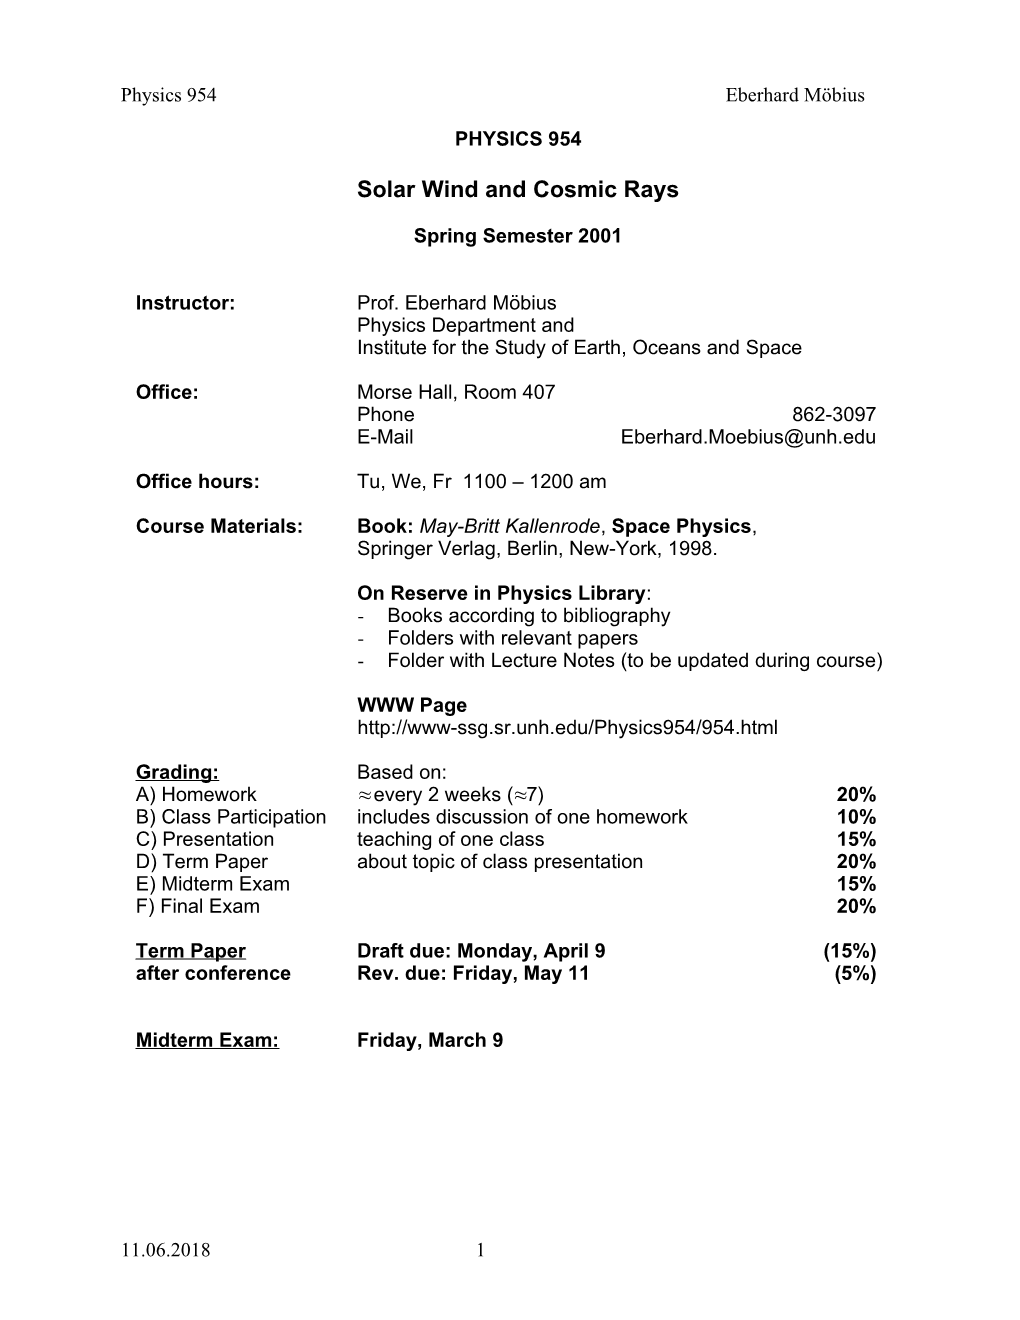 Solar Wind and Cosmic Rays